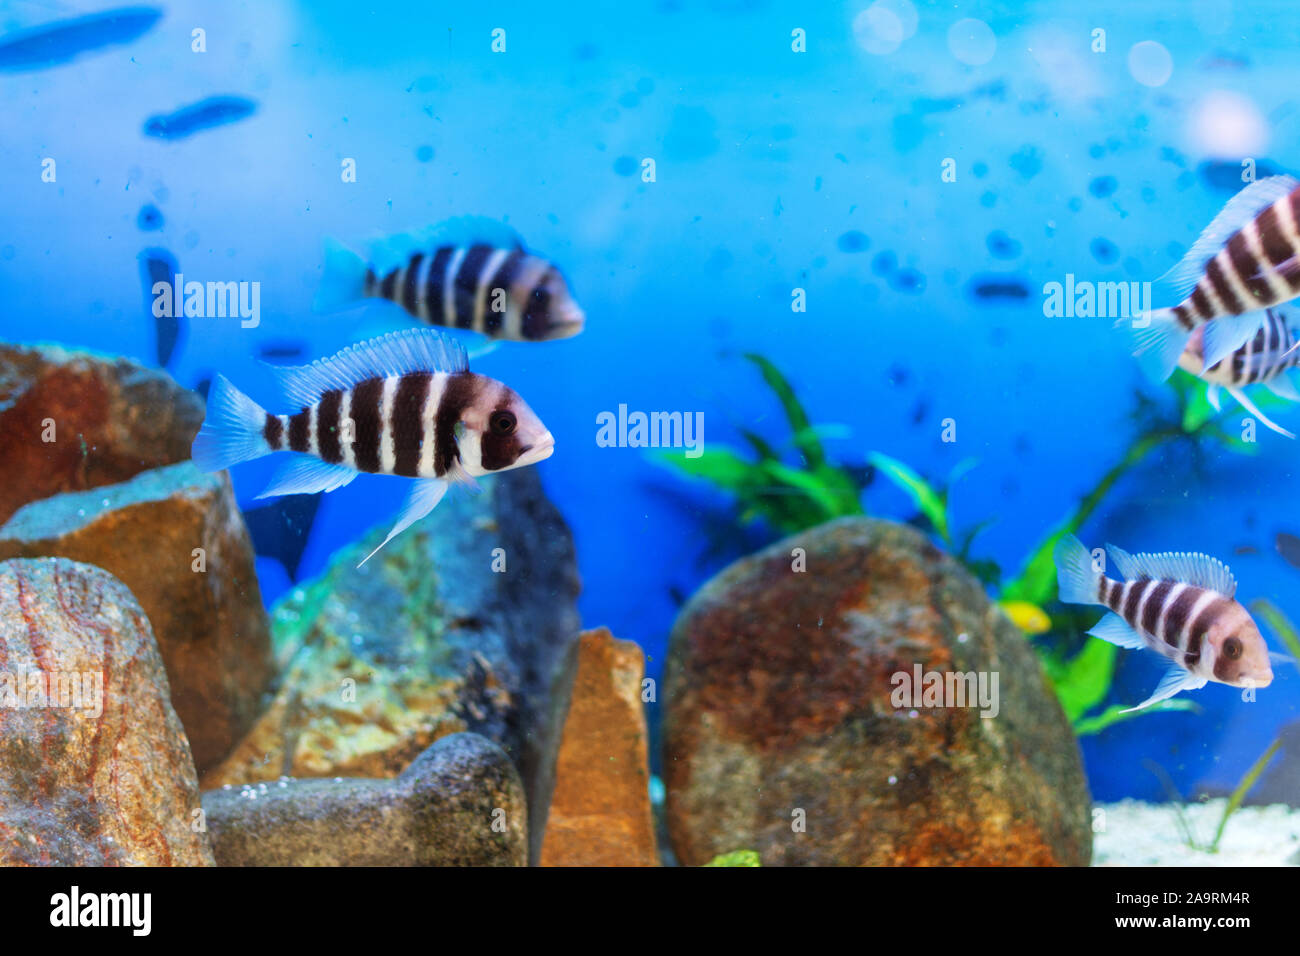 Beautiful underwater world with tropical fish. Fish swimming in clear blue water with air bubbles. Stock Photo